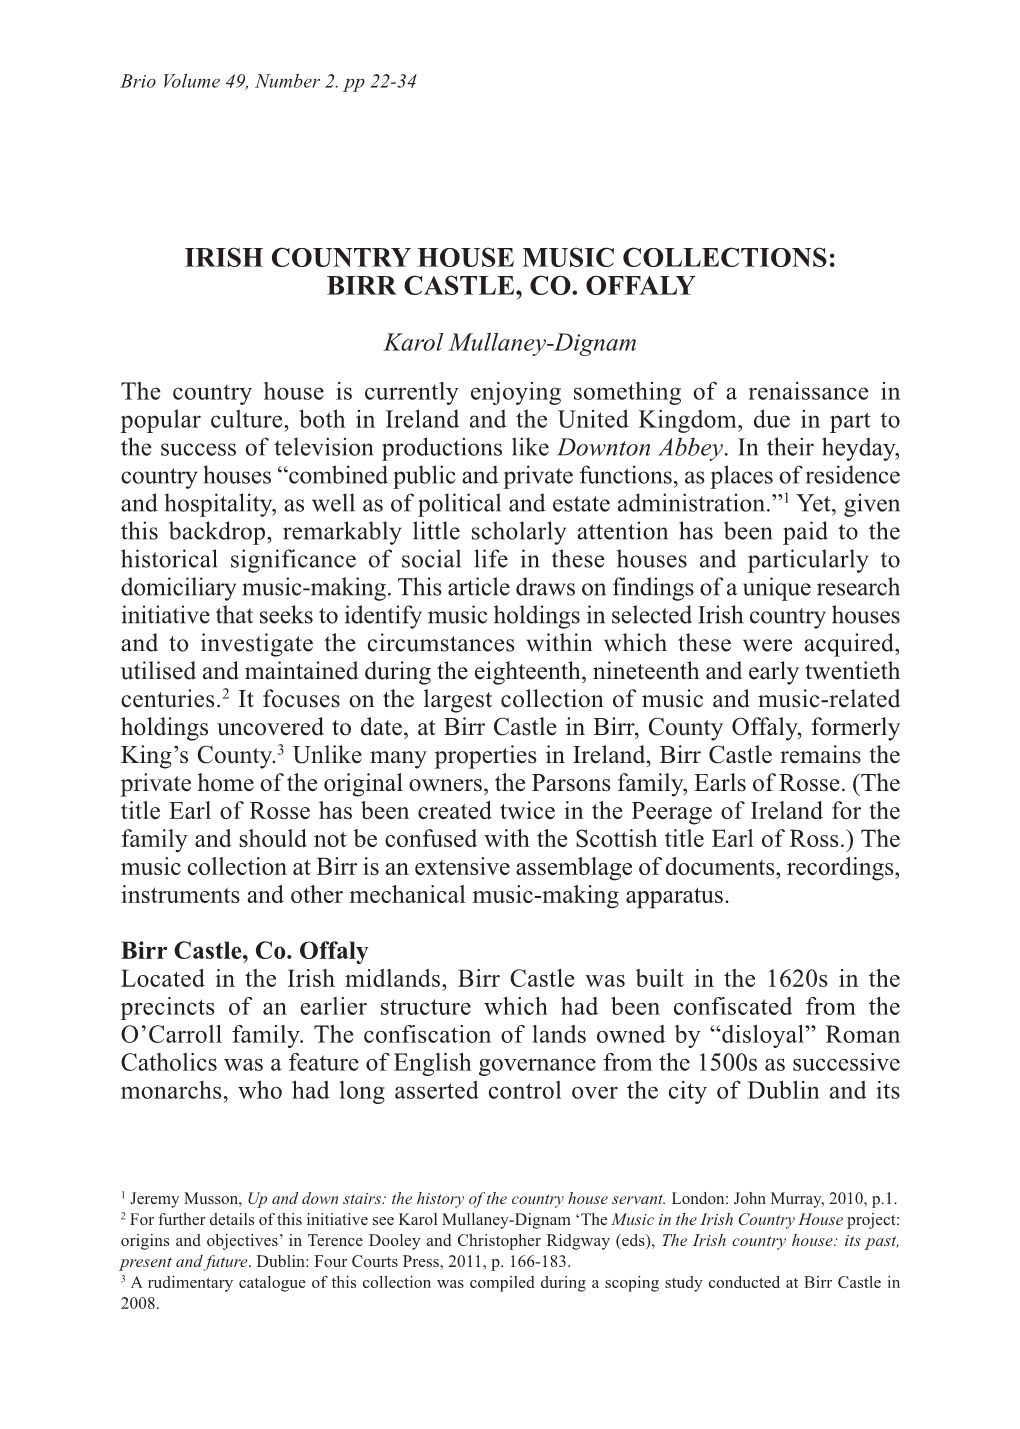 Irish Country House Music Collections: Birr Castle, Co. Offaly